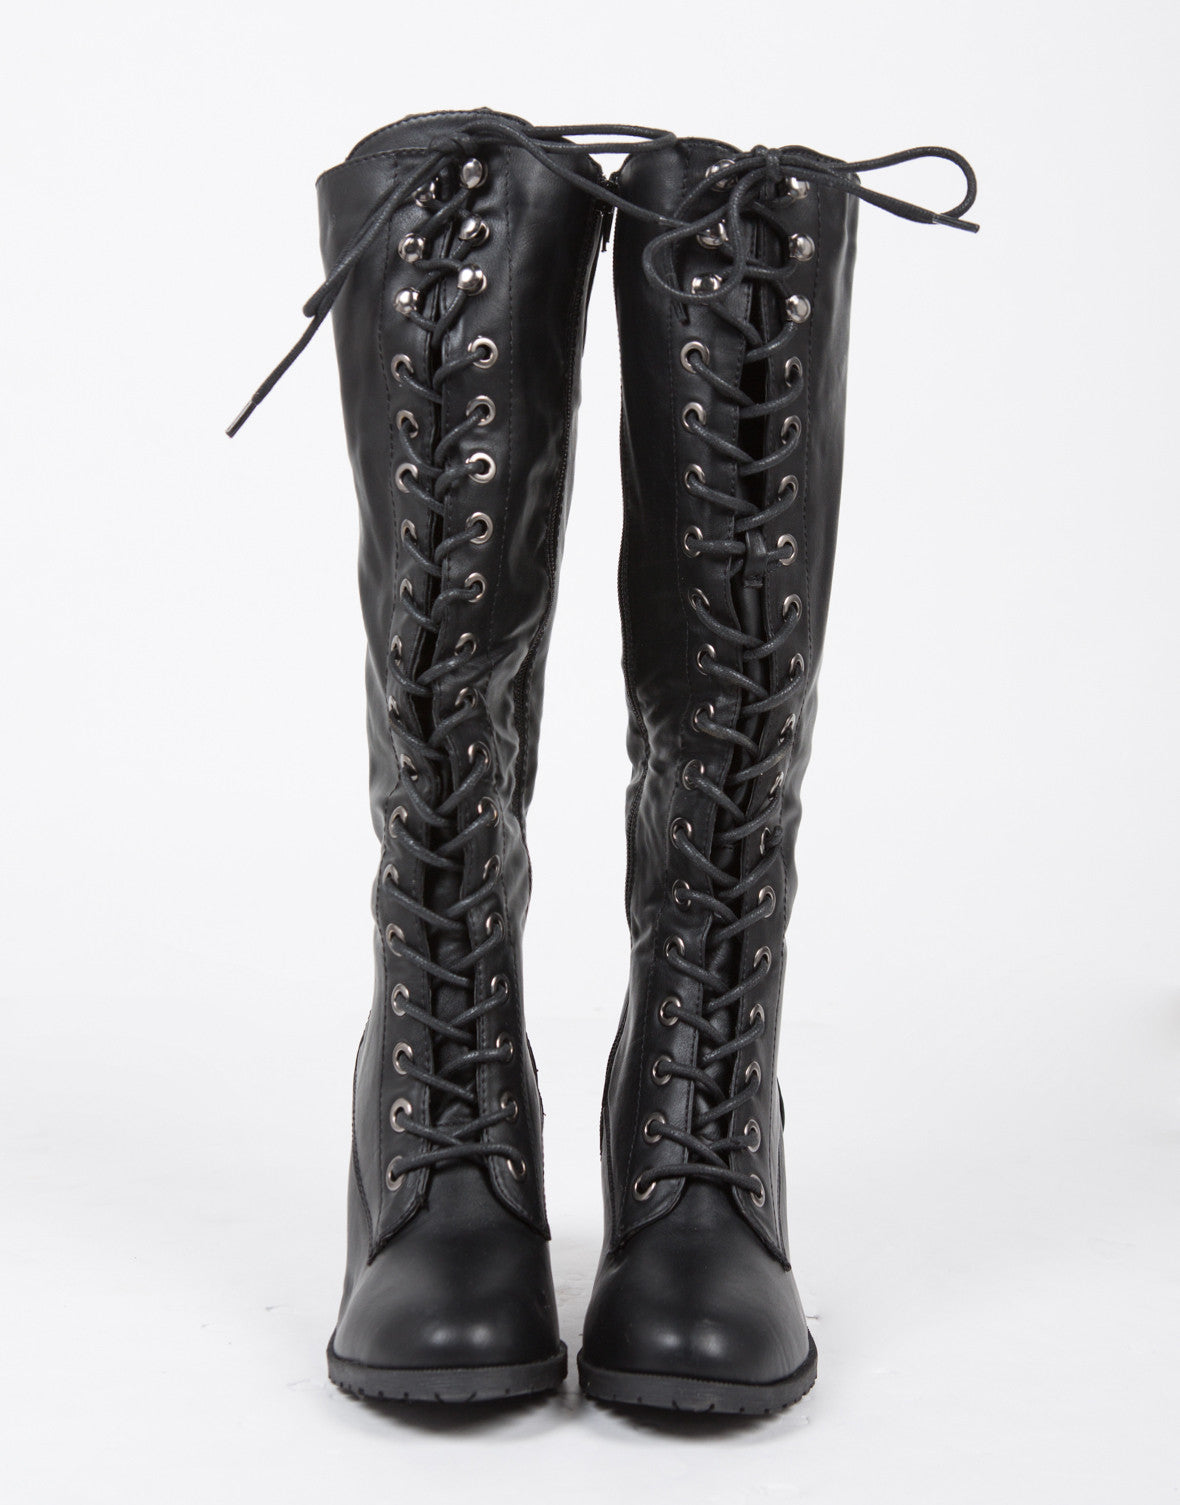 Tall Lace Up Boots Black Boots Knee High Boots Chunky Boots 2020ave 